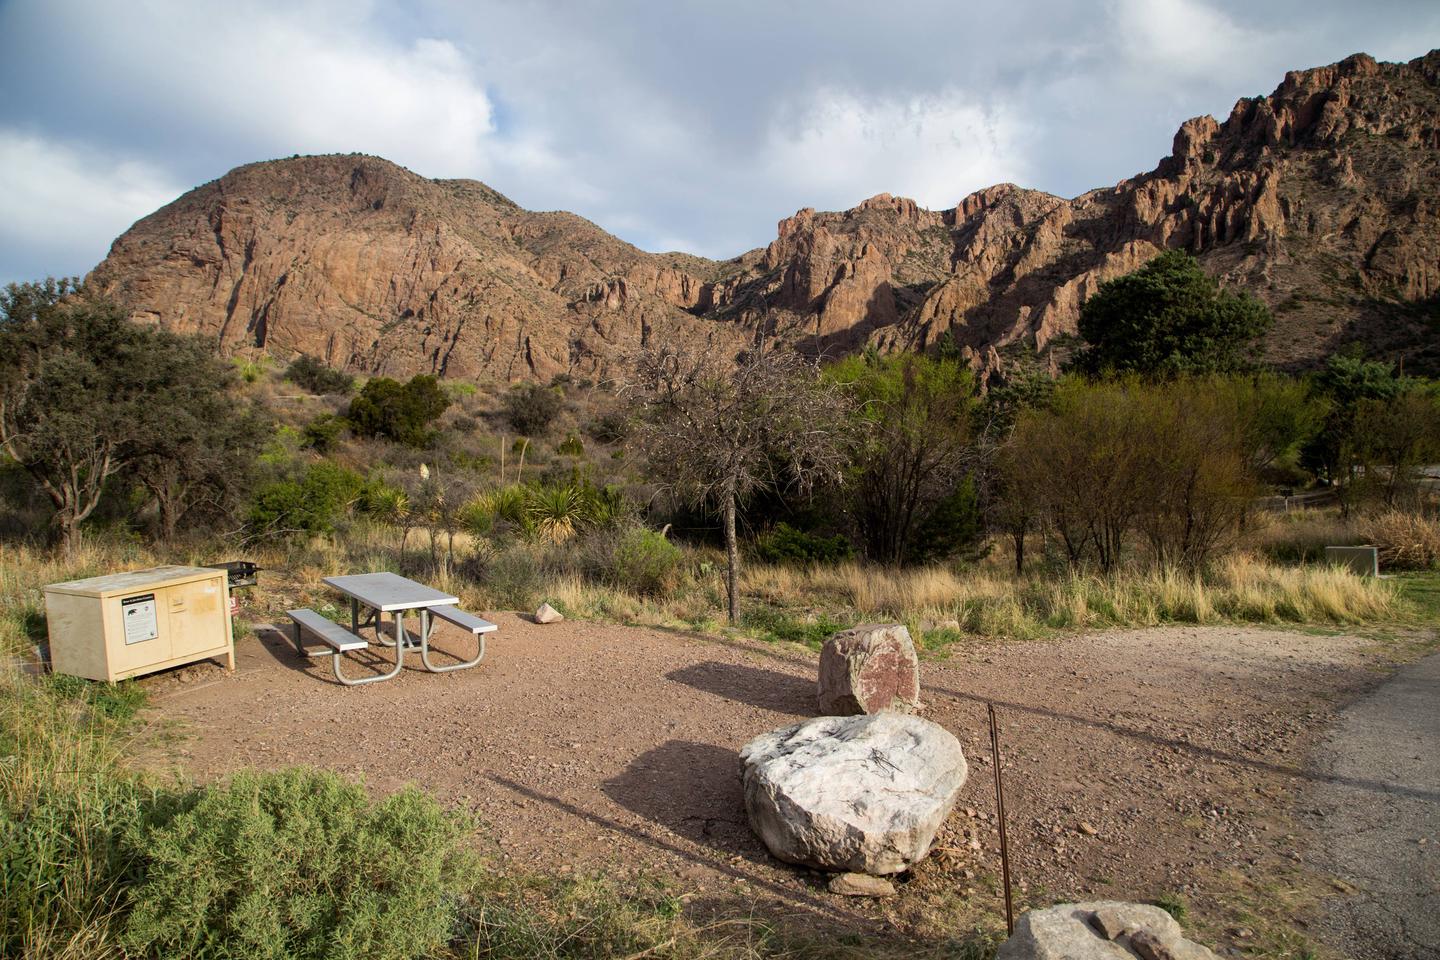 Chisos Basin Campsite #8 full viewBear box, picnic table, tent pad, and parking area